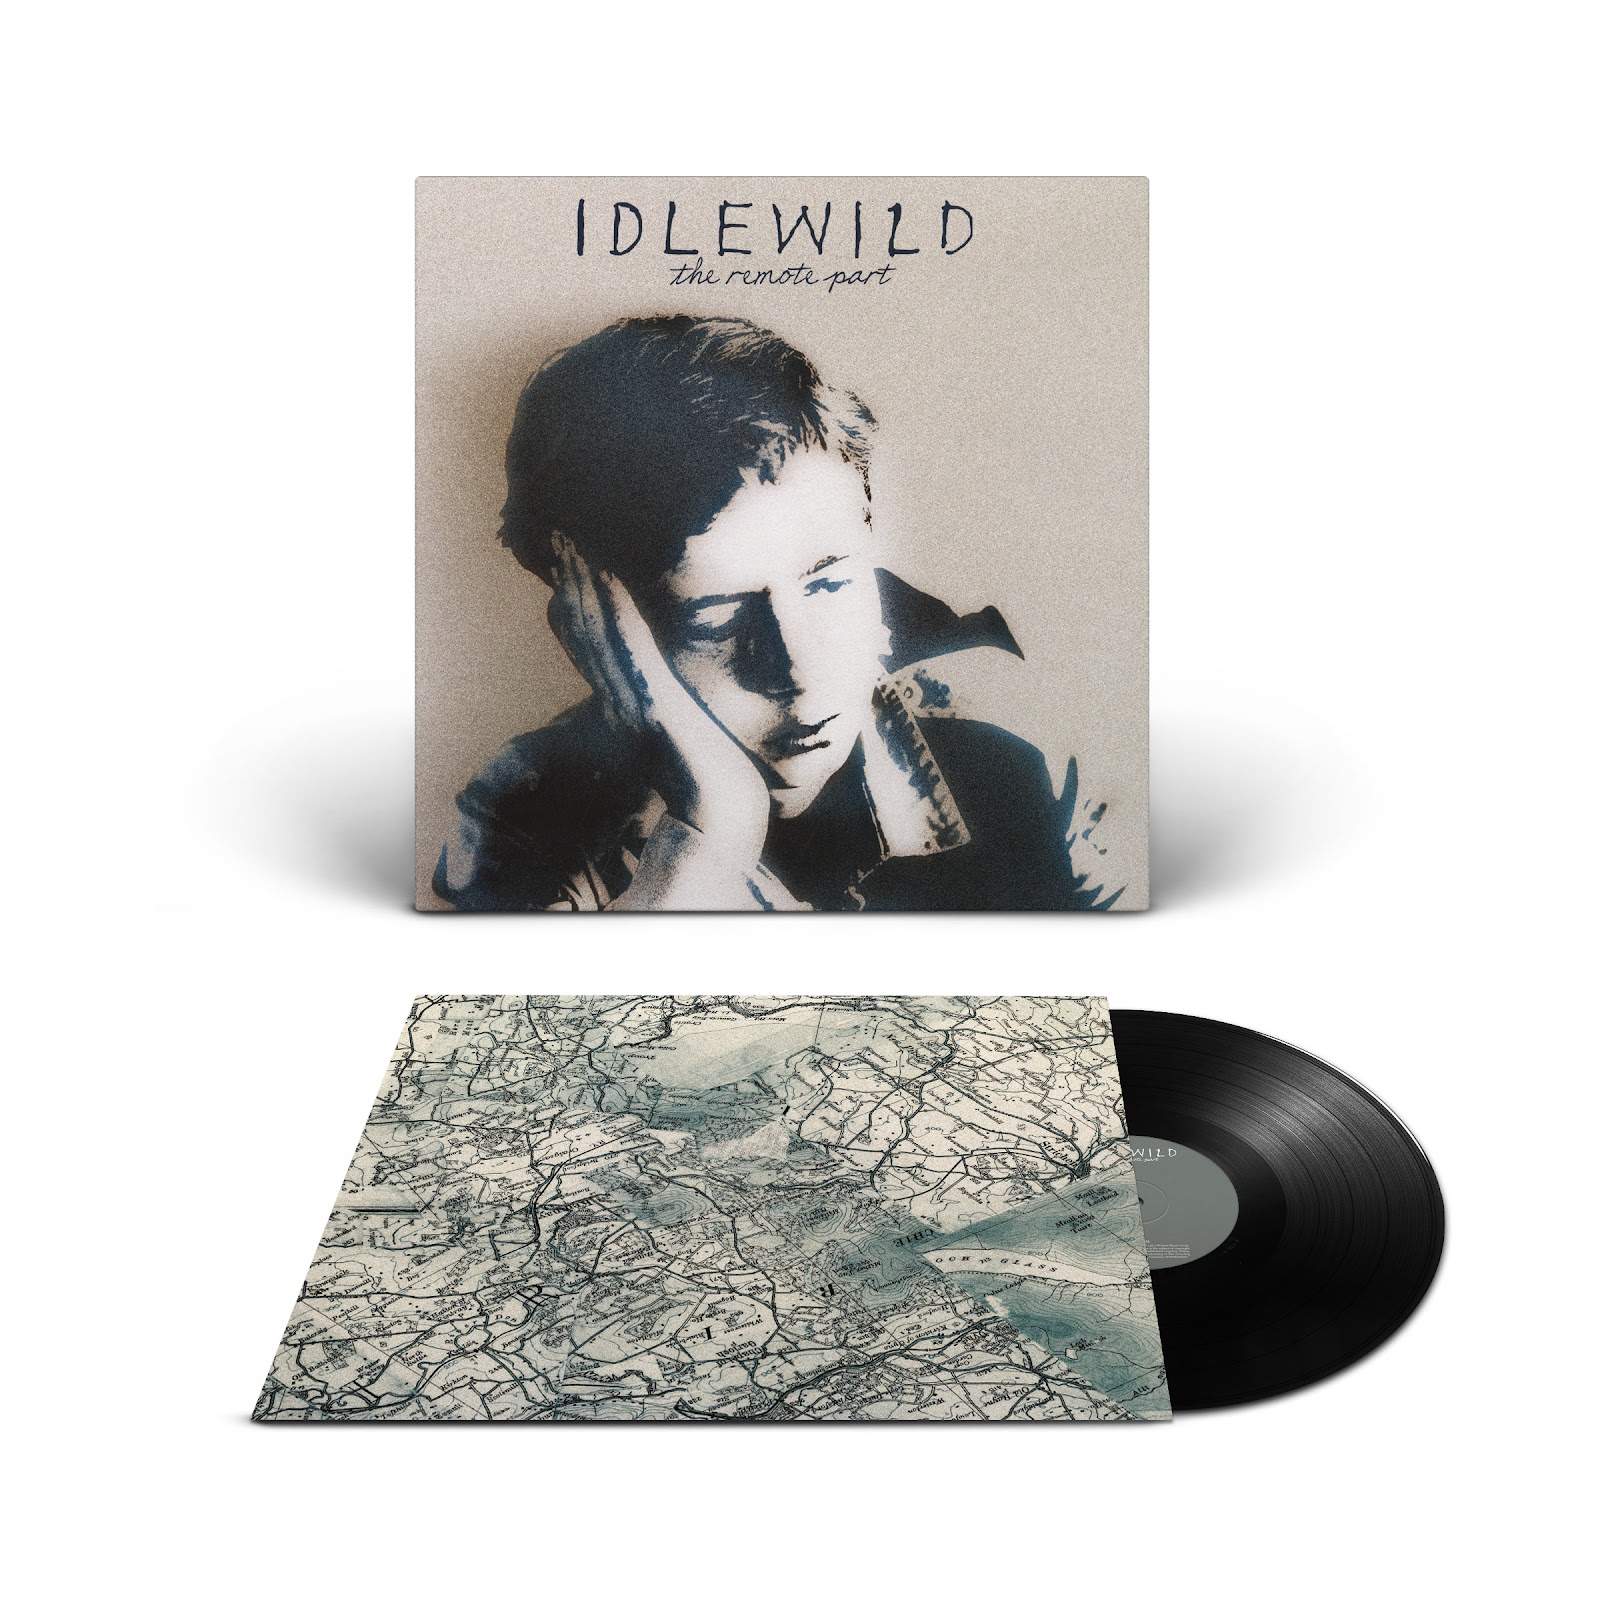 NEWS: Idlewild announce 20th anniversary vinyl re-issue of 'The Remote Part' and summer tour